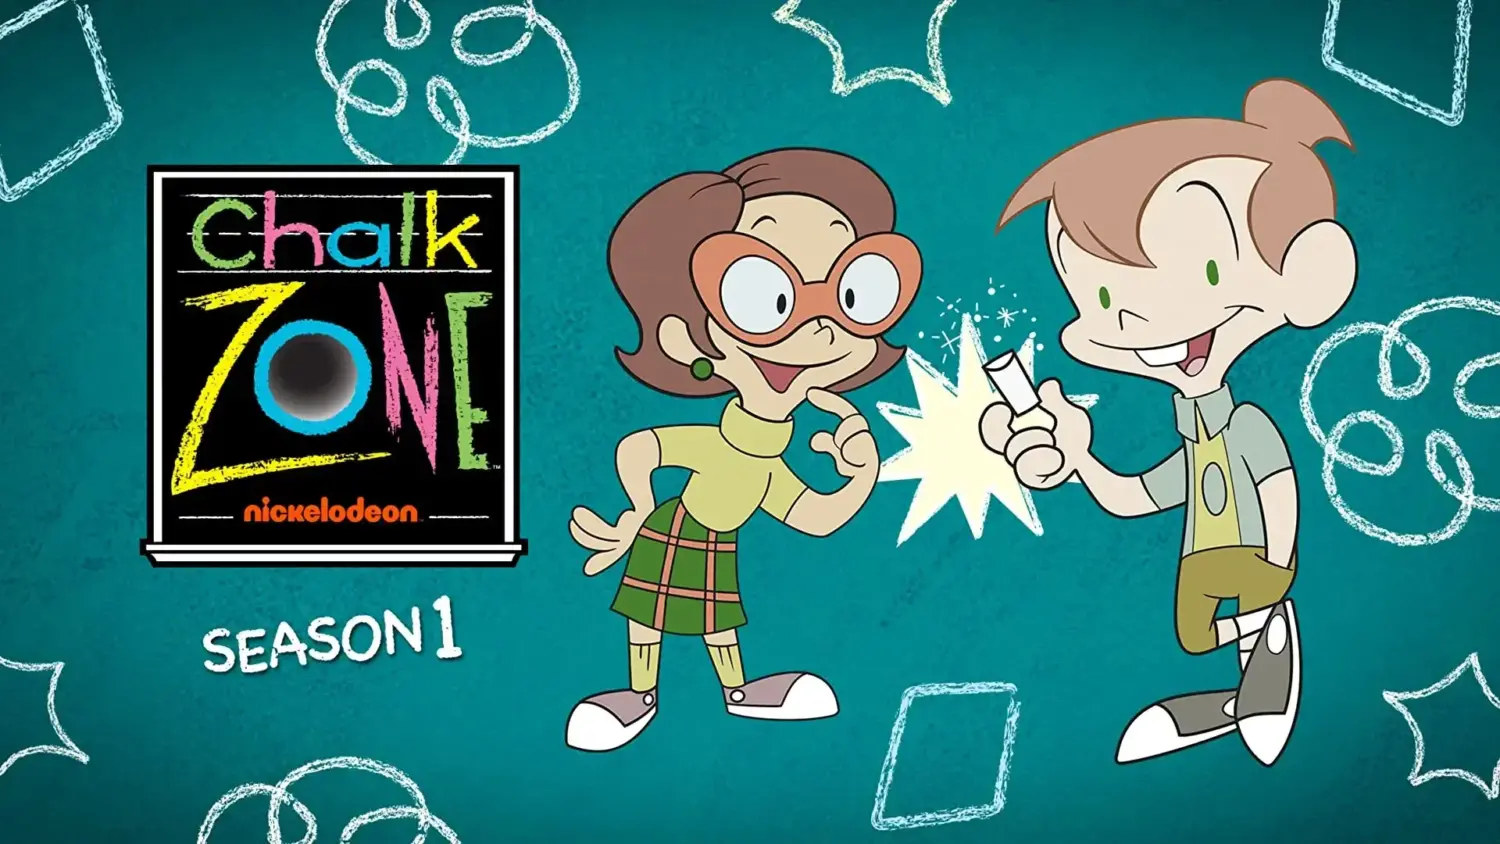 Lessons from ChalkZone